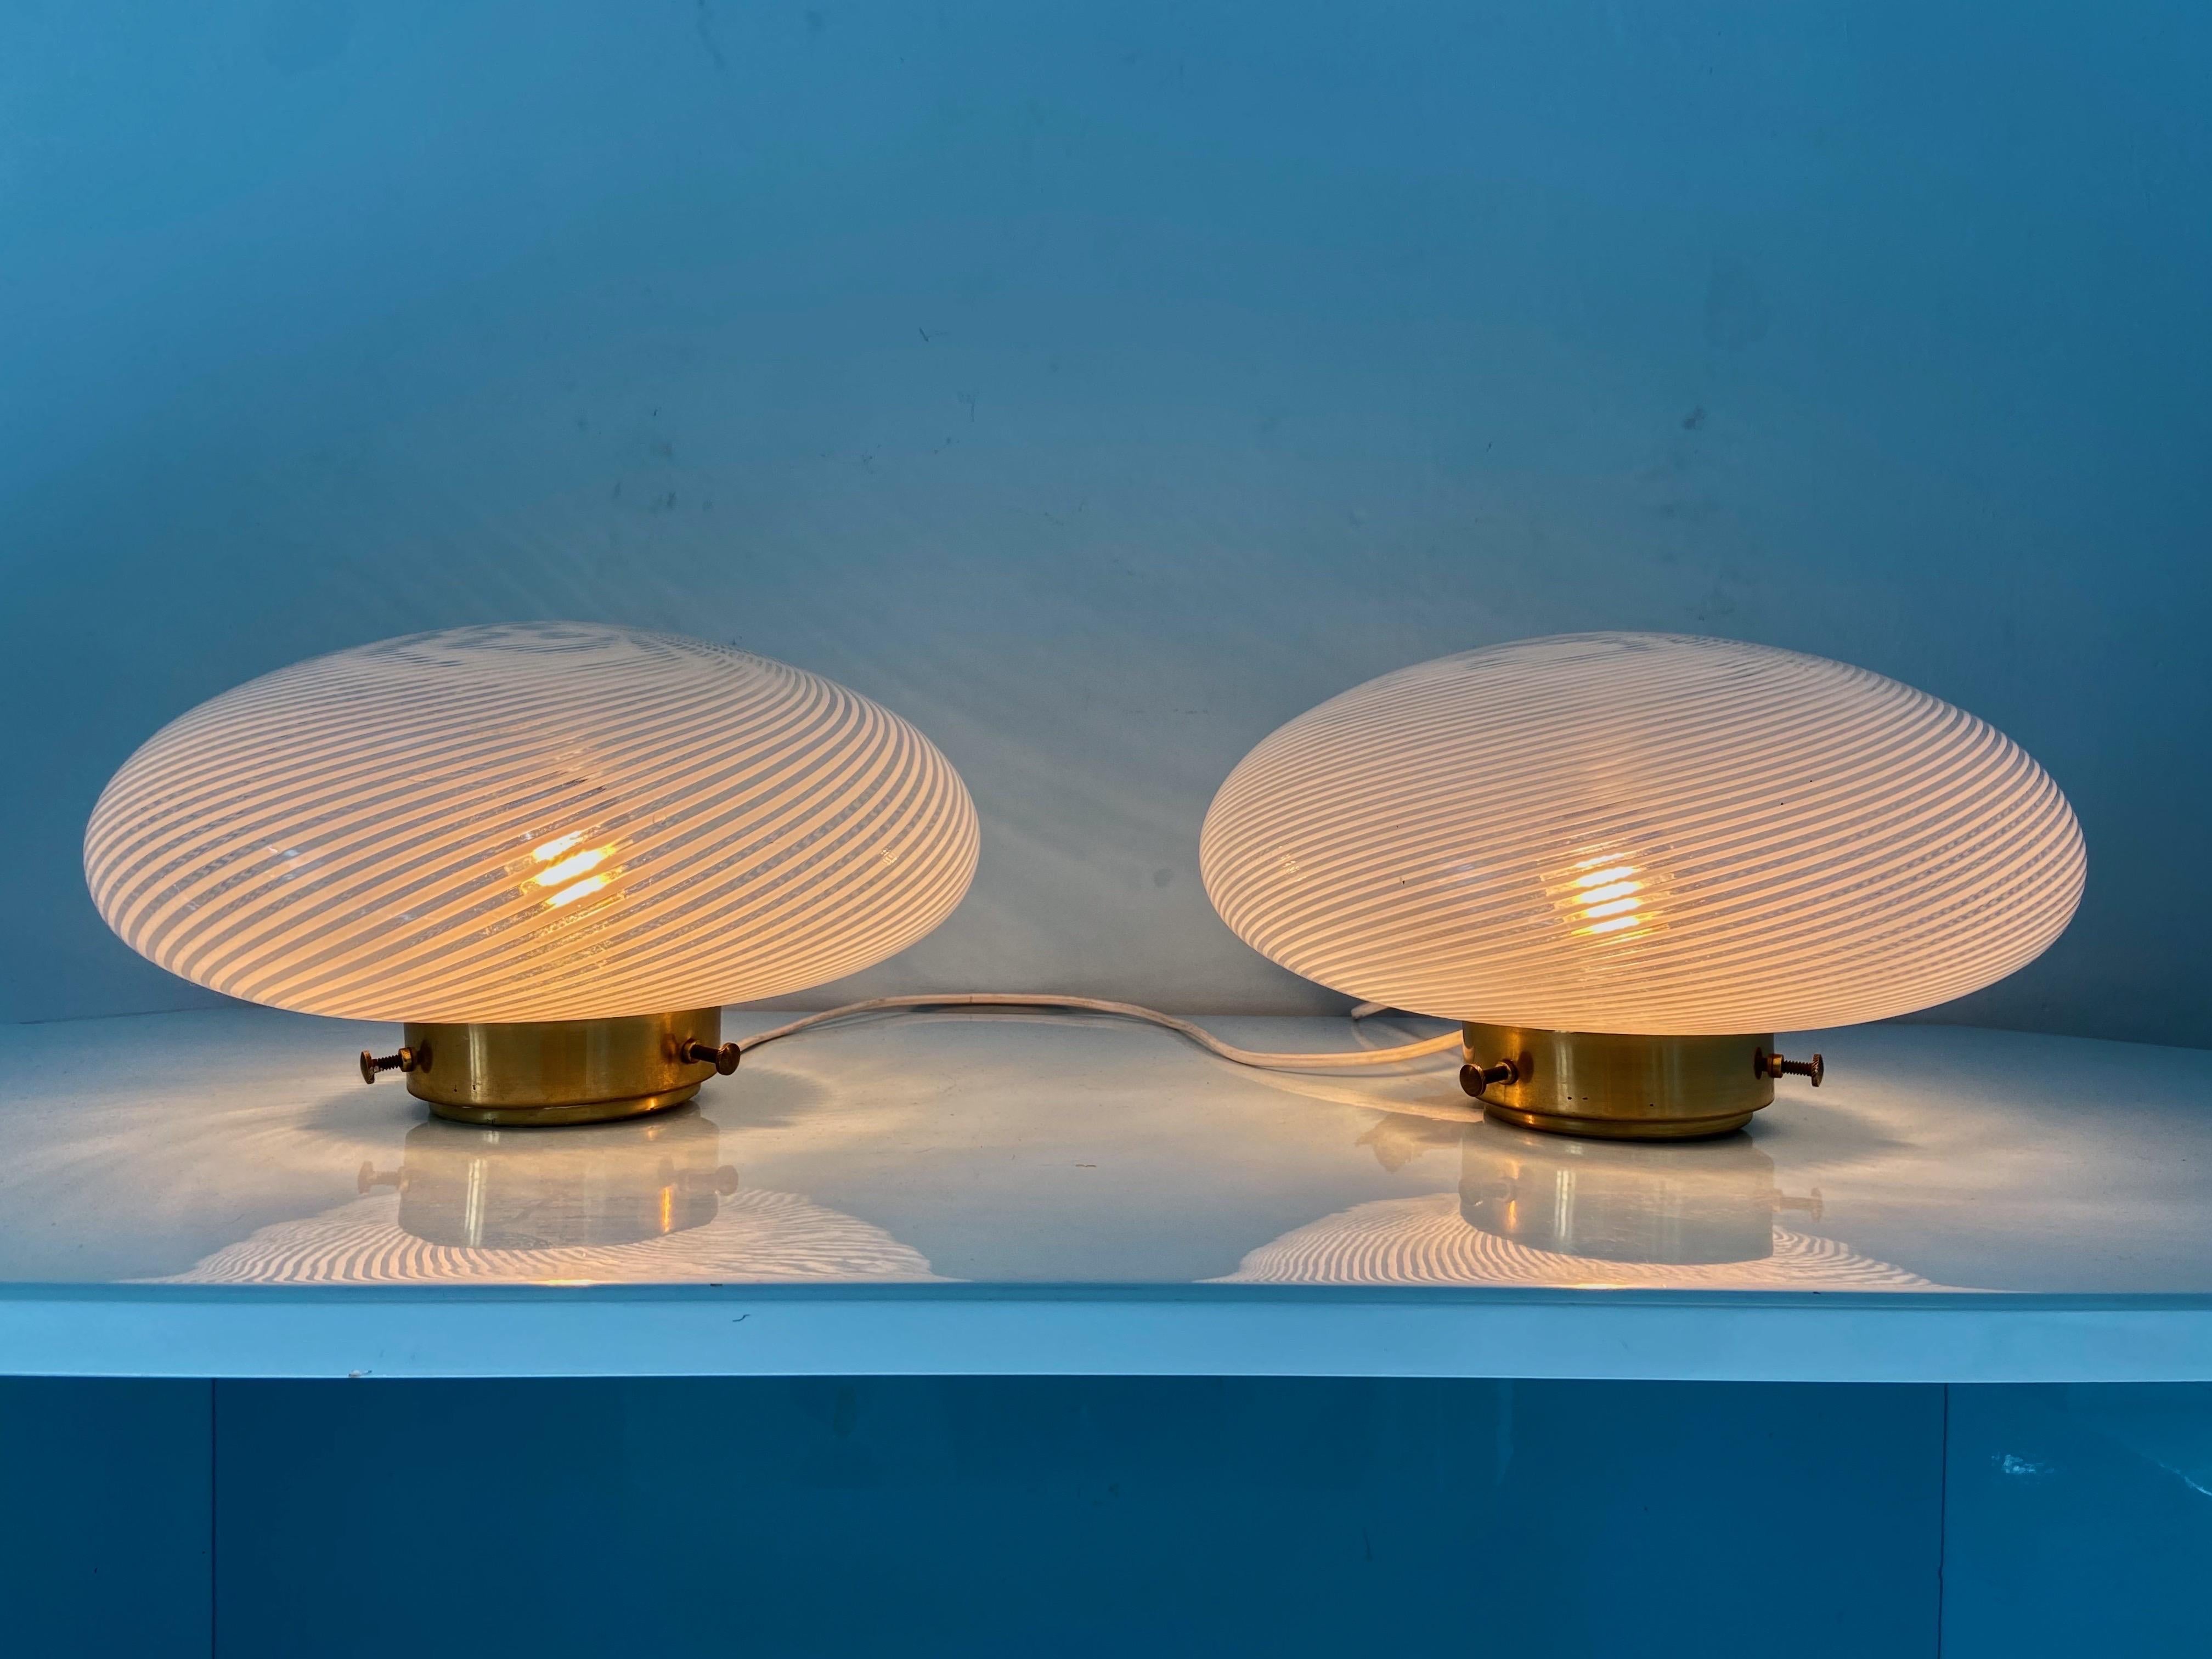 Elegant set of 2 wall sphere sconces by Ludovico Diaz de Santillana for Venini, Series -Tessuto-, Italy, 1970s. The Murano glasses are set on a brass frame. Very good condition, the glass is perfect. Sold as pair. 
Details

Creator: Ludovico Diaz